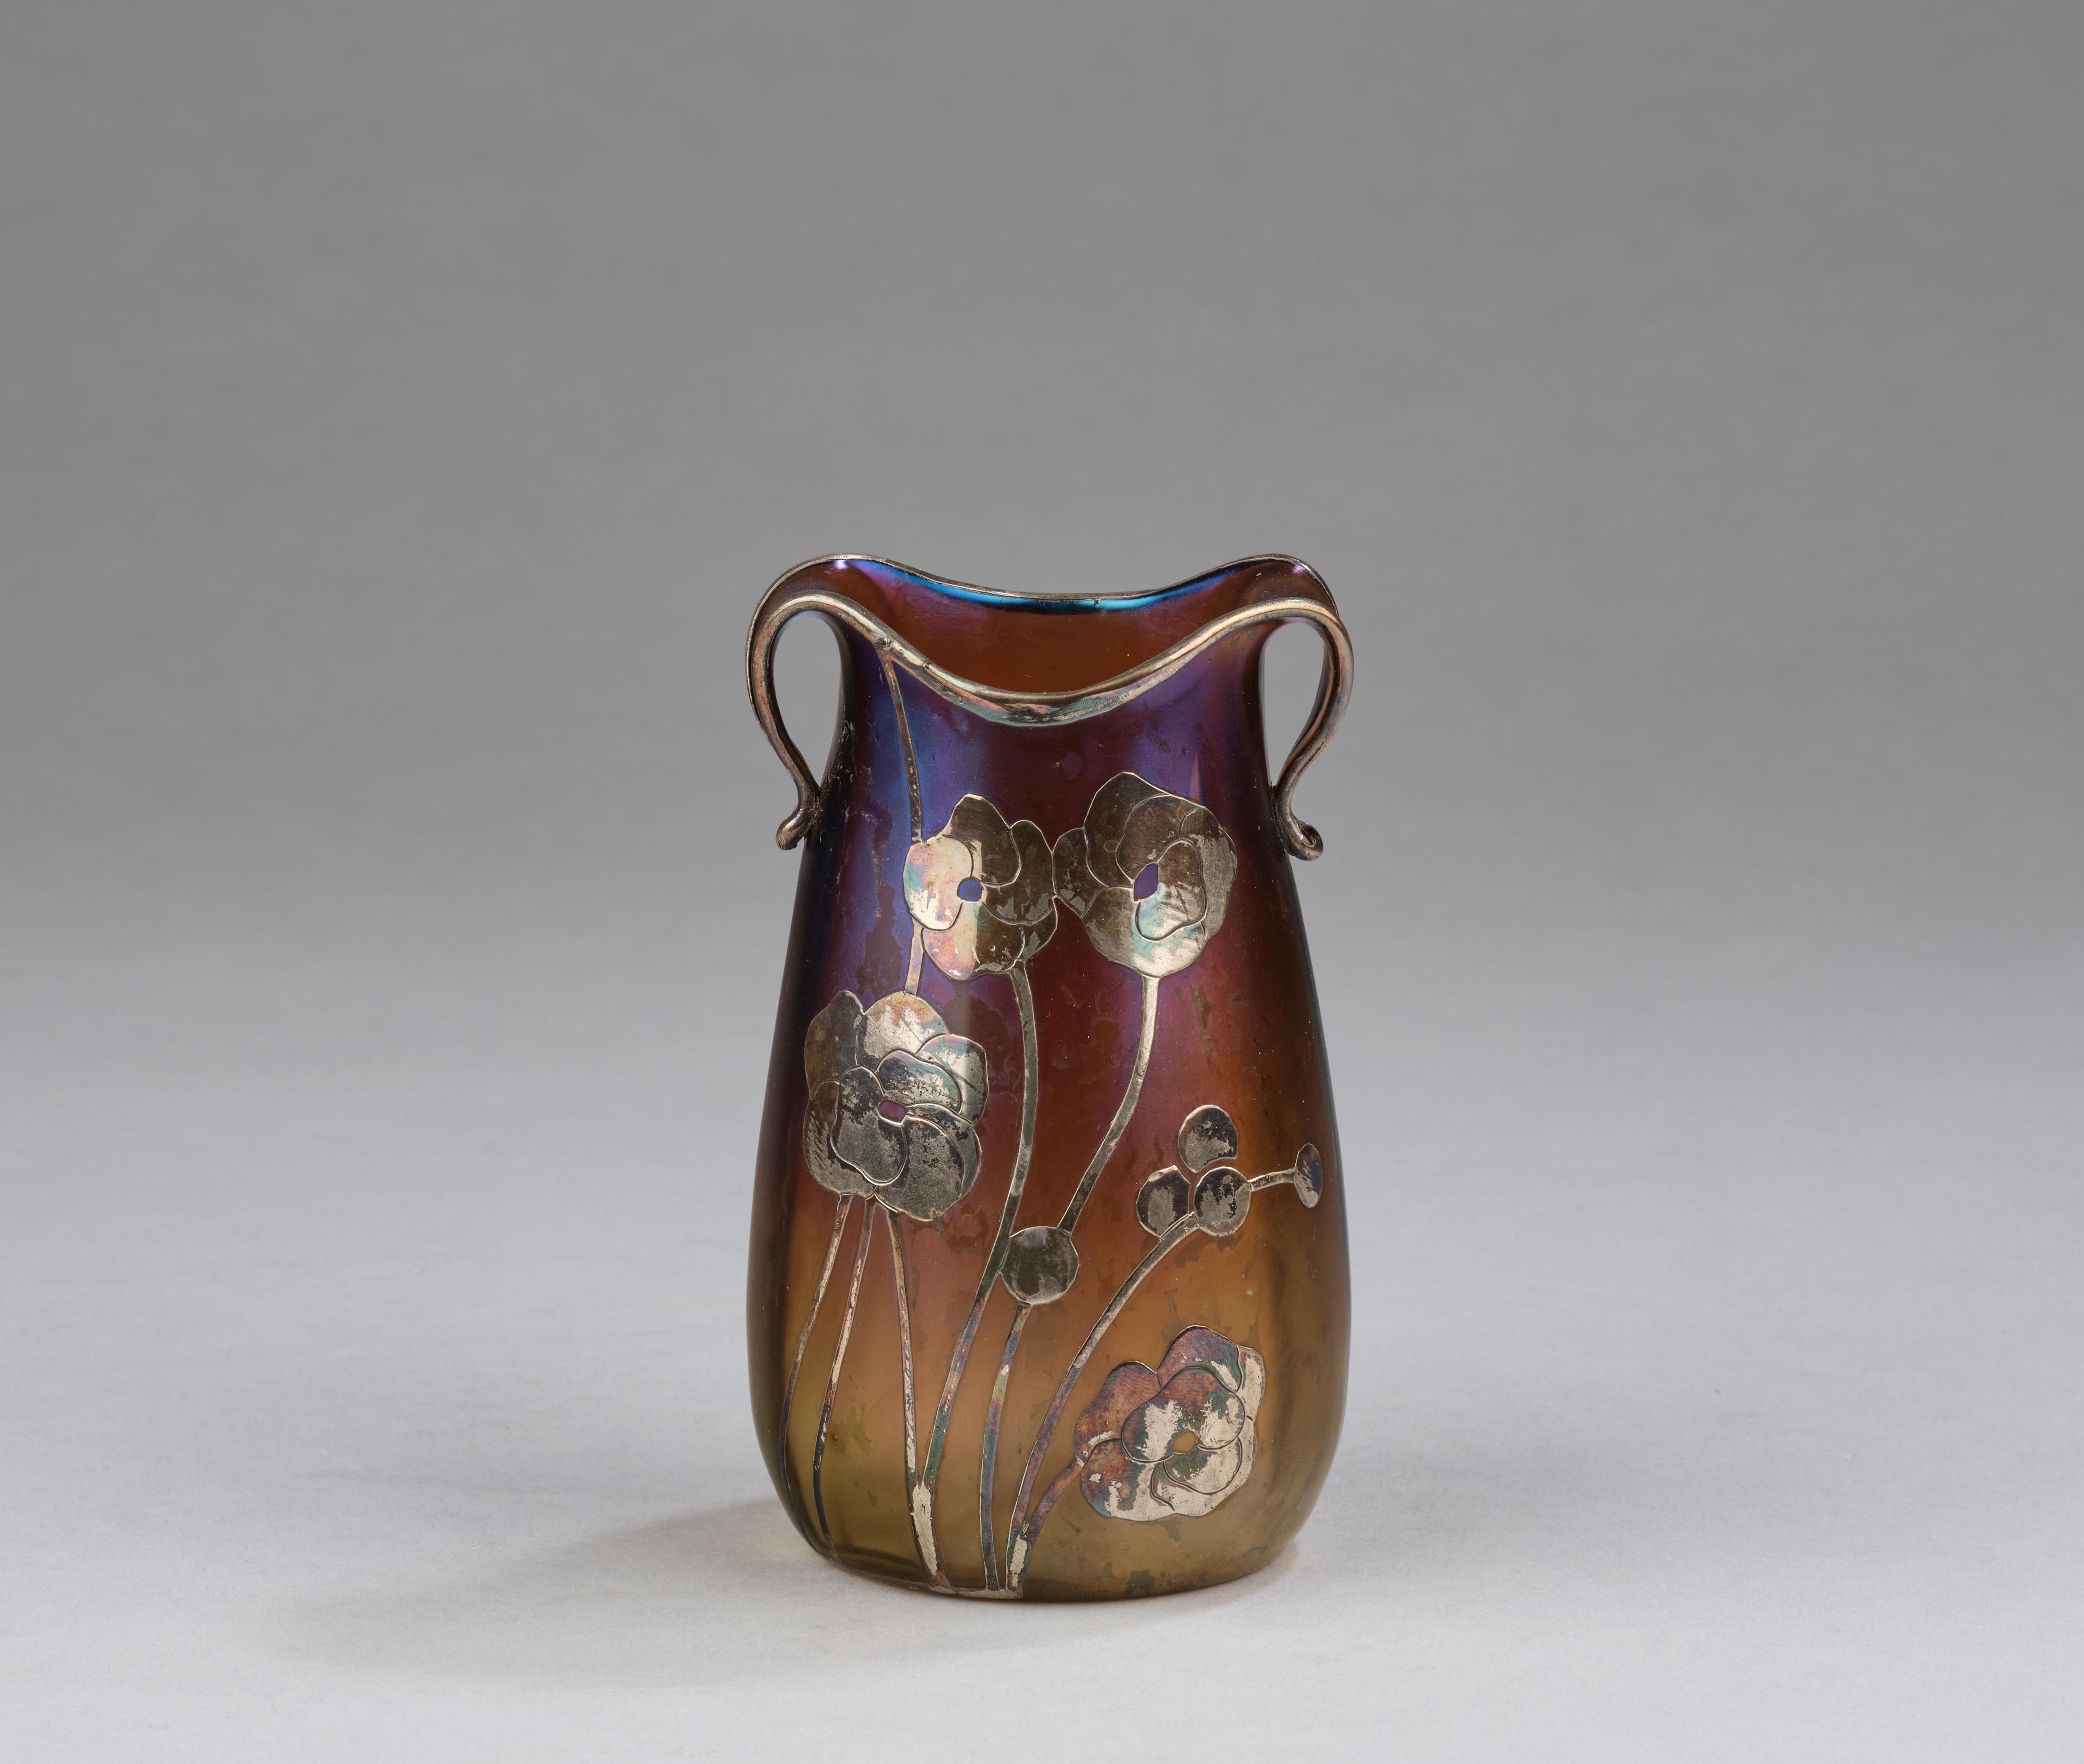 A handled vase with galvanoplastic decoration, Johann Lötz Witwe,  Klosermühle, for E. Bakalowits, Söhne, Vienna c. 1902 - Jugendstil and 20th  Century Arts and Crafts 2023/11/03 - Realized price: EUR 1,700 - Dorotheum